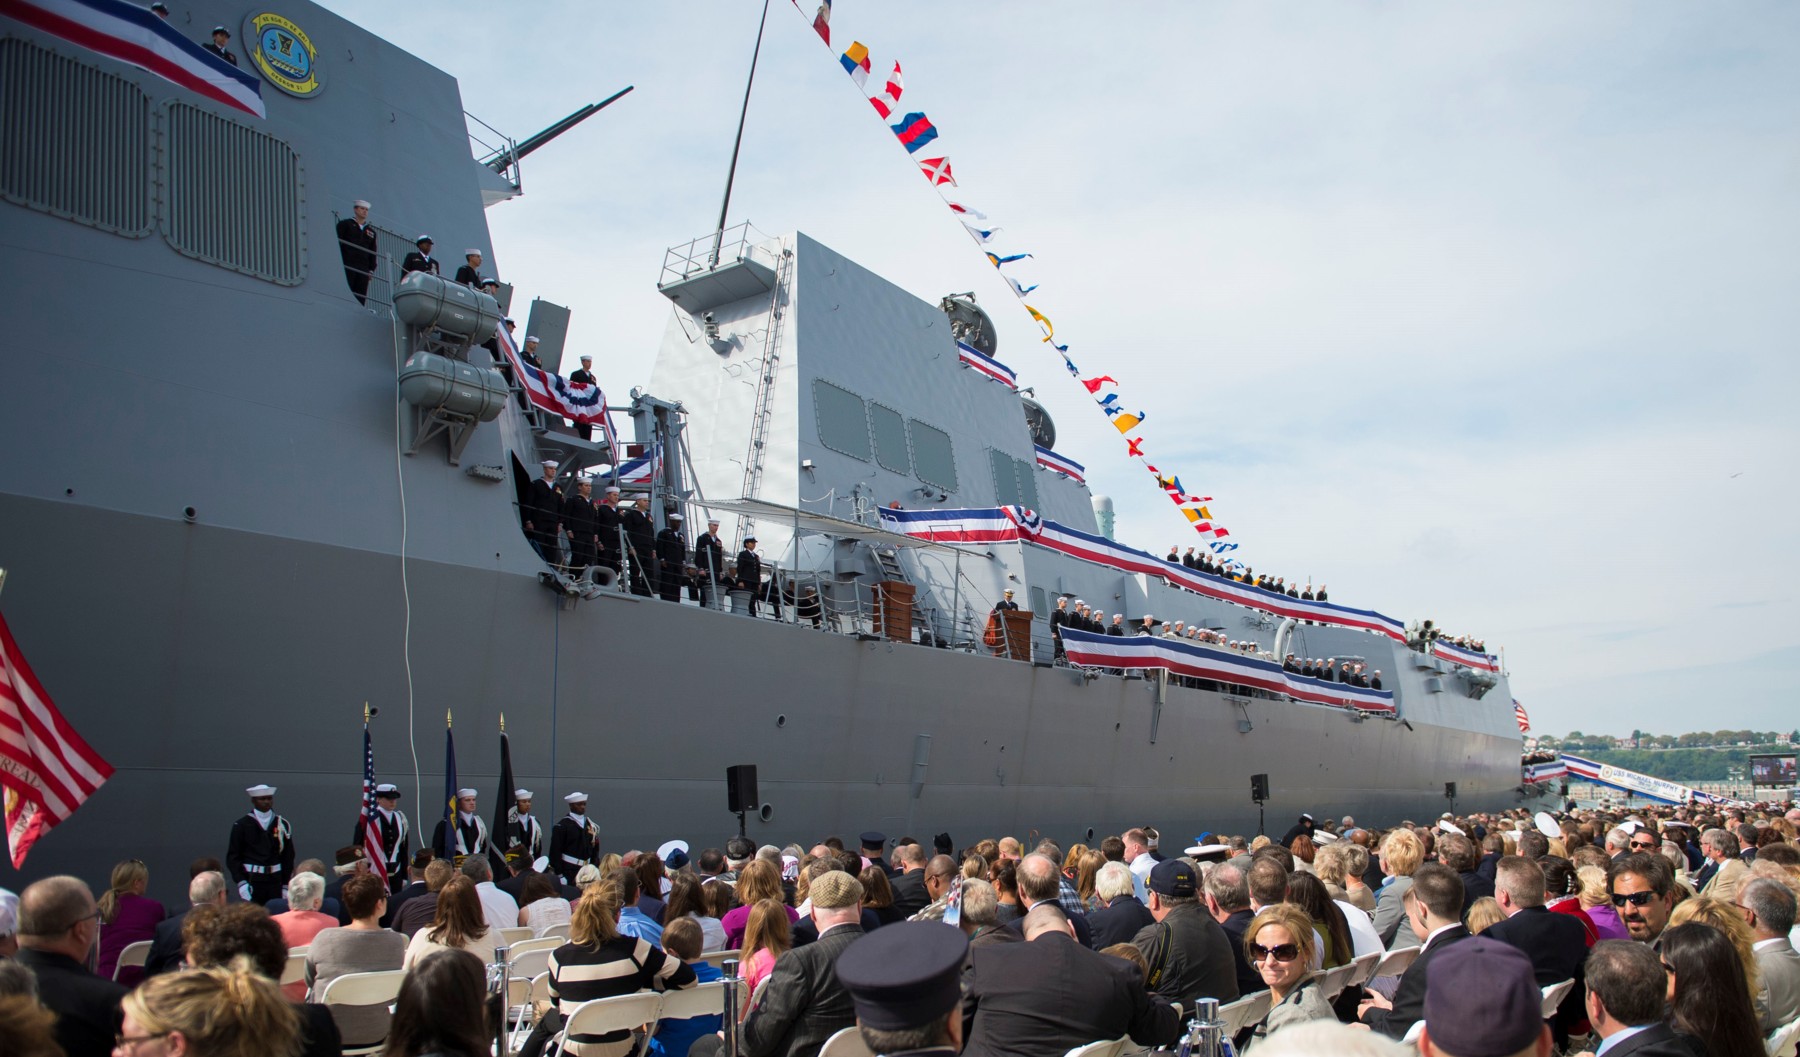 ddg-112 uss michael murphy arleigh burke class guided missile destroyer aegis us navy commissioning new york 76p